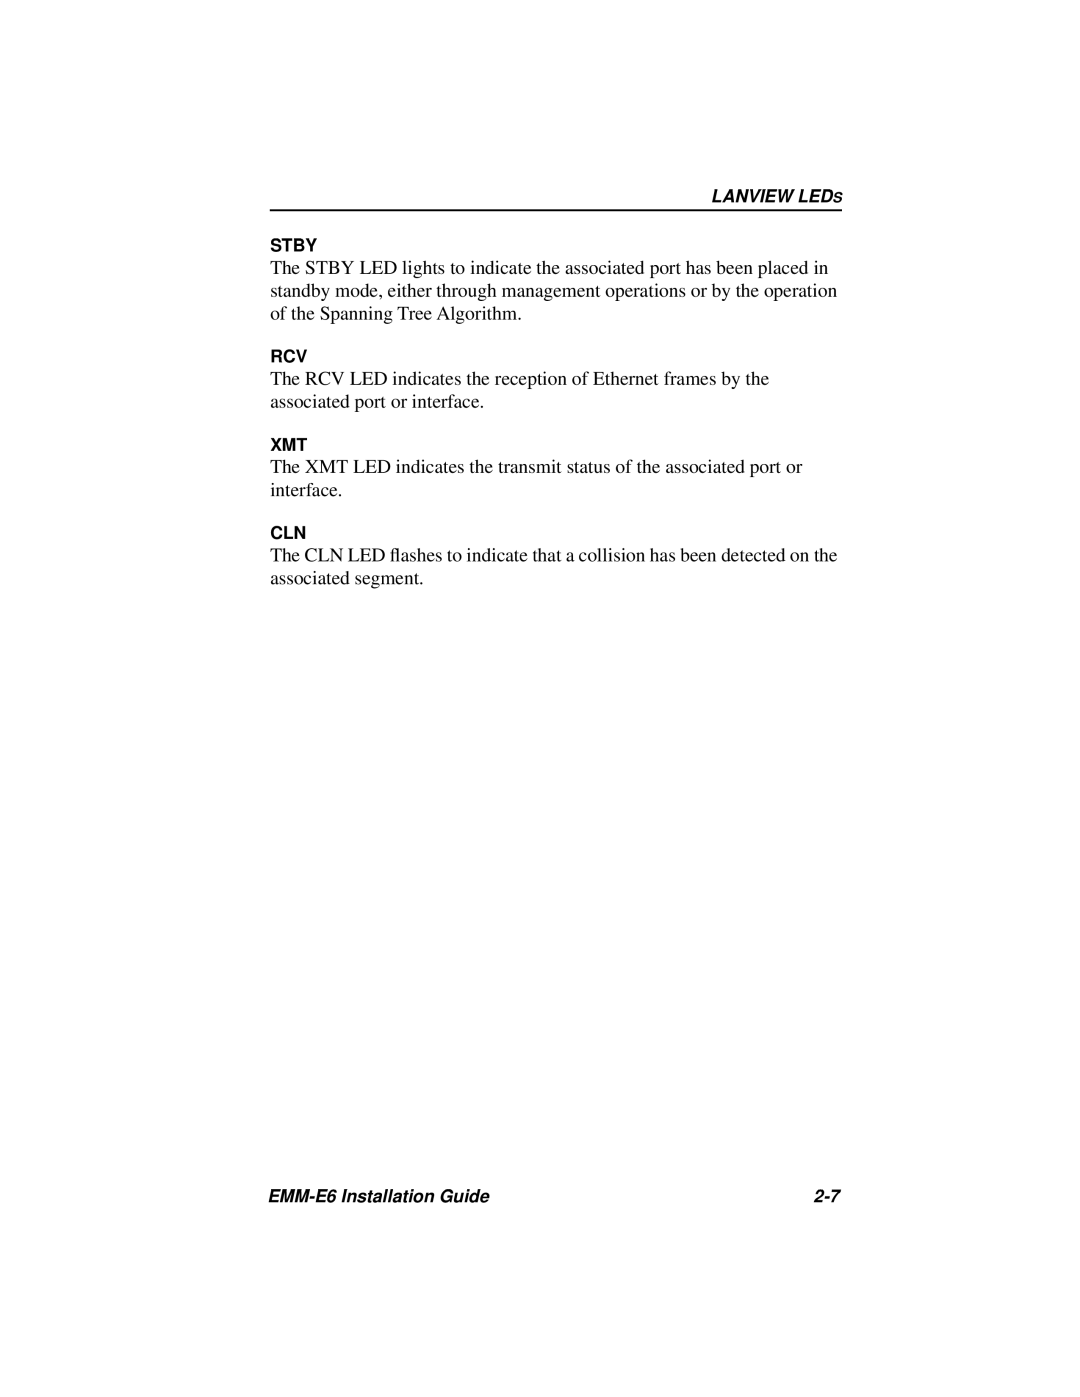 Cabletron Systems EMM-E6 manual Stby 